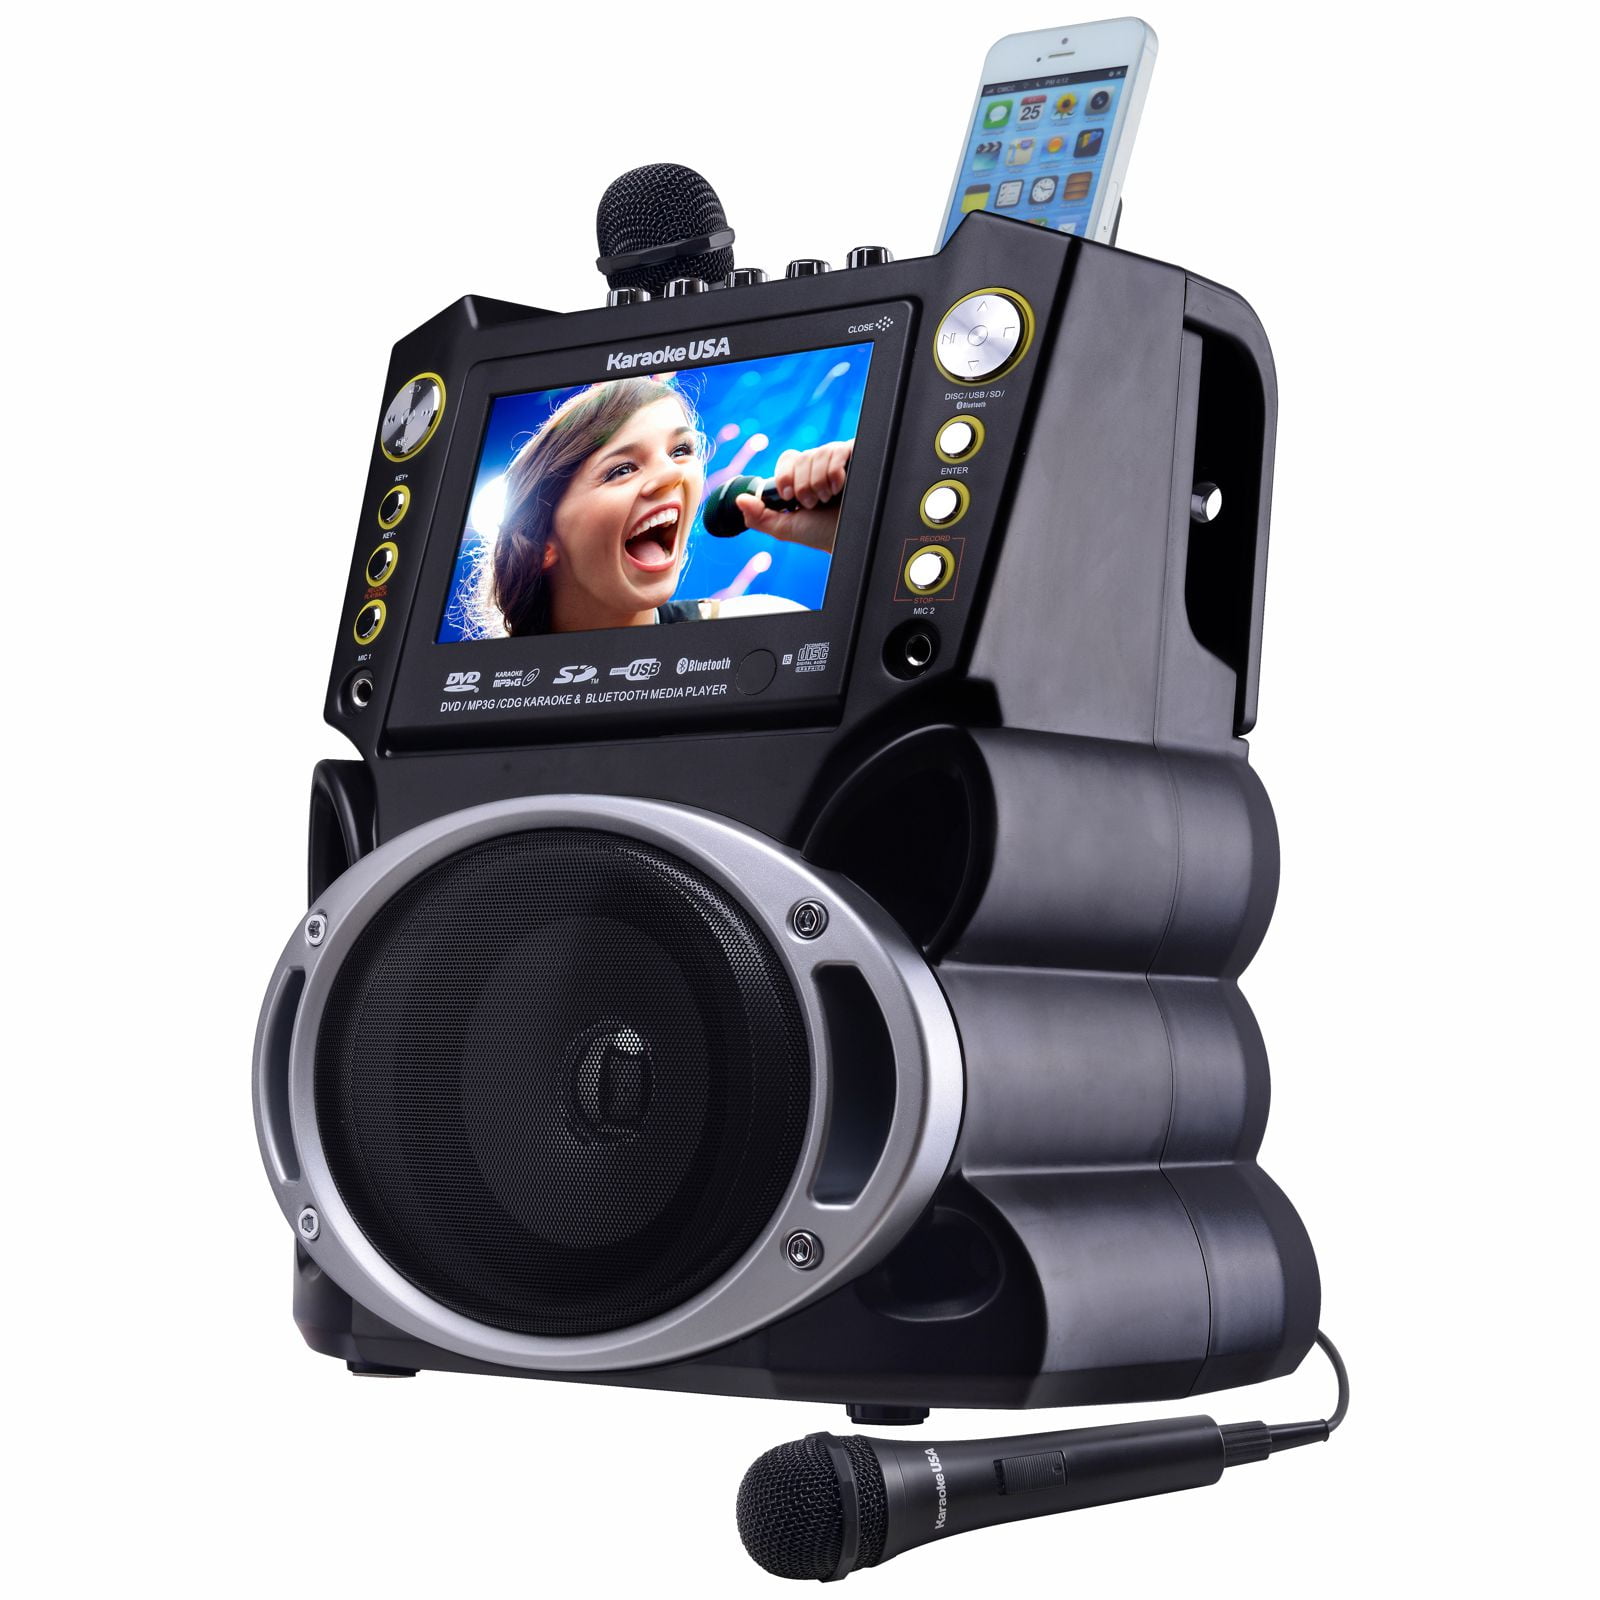 Karaoke USA GF830 DVD/CDG Karaoke Player with SD Slot MP3G, Bluetooth, 7  TFT Color Screen & Recording 300 Songs Included! 